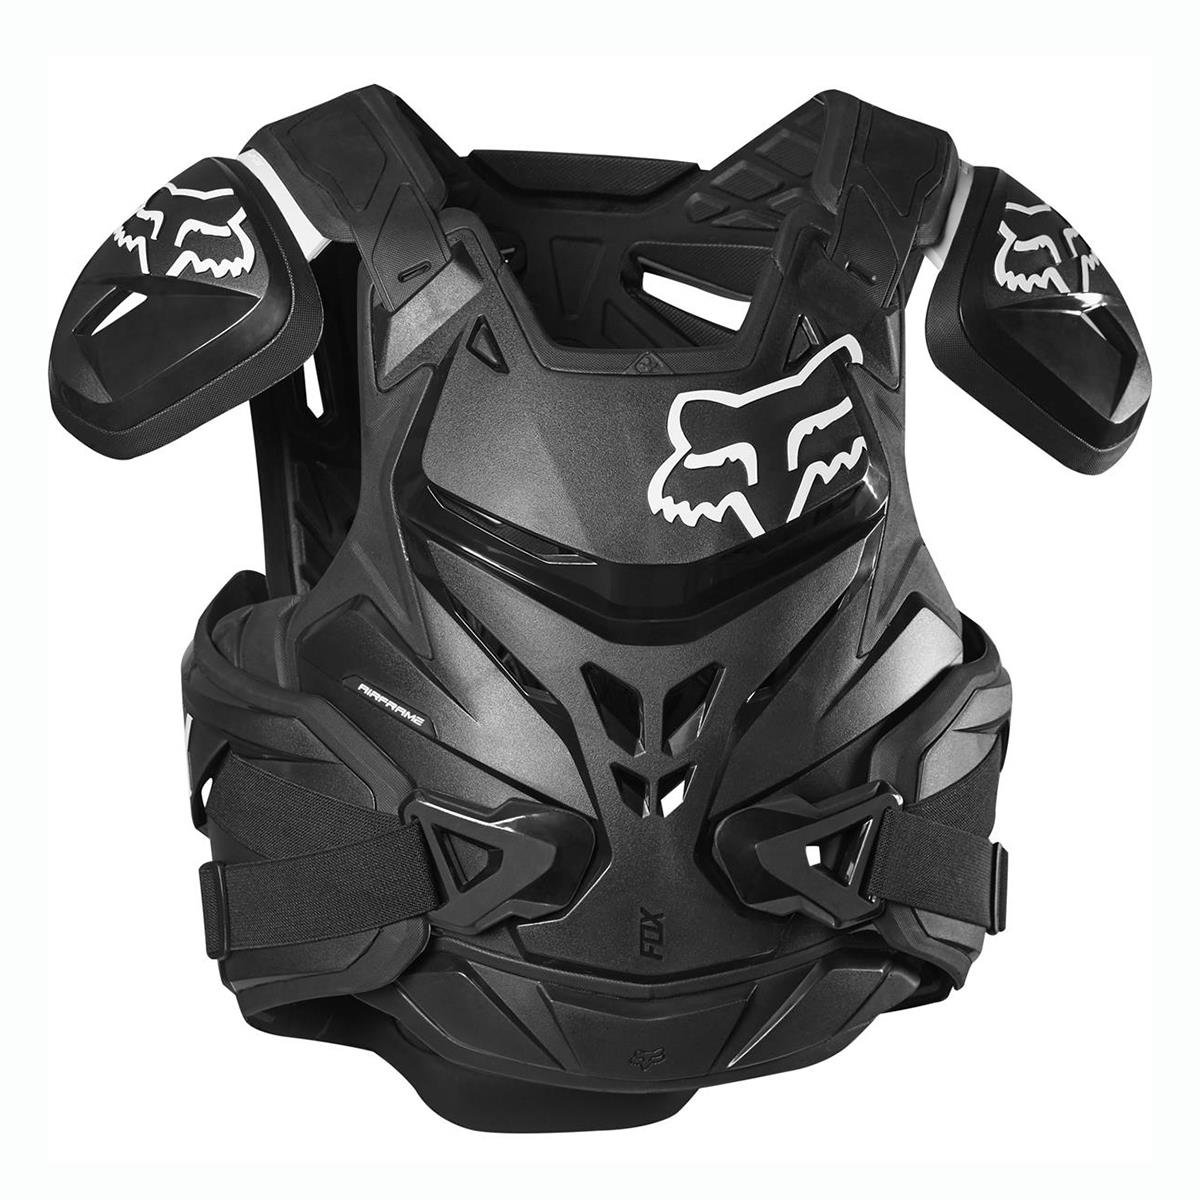 Fox Chest Protector Airframe Pro Black